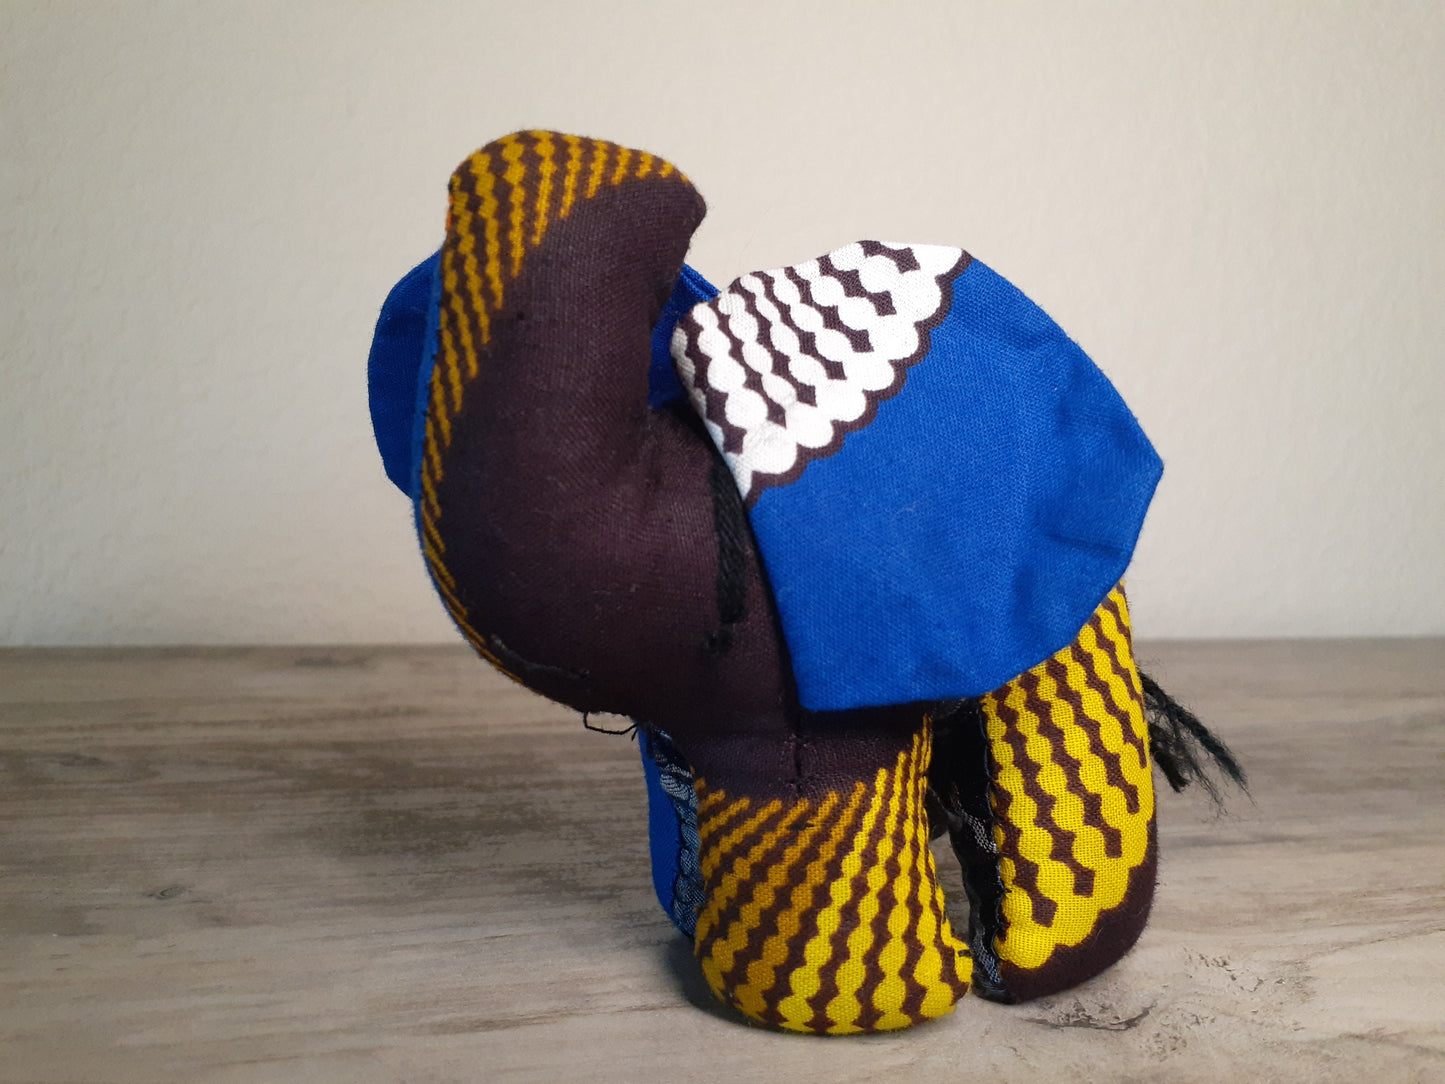 Small Stuffed Elephant Toy made from African Fabric